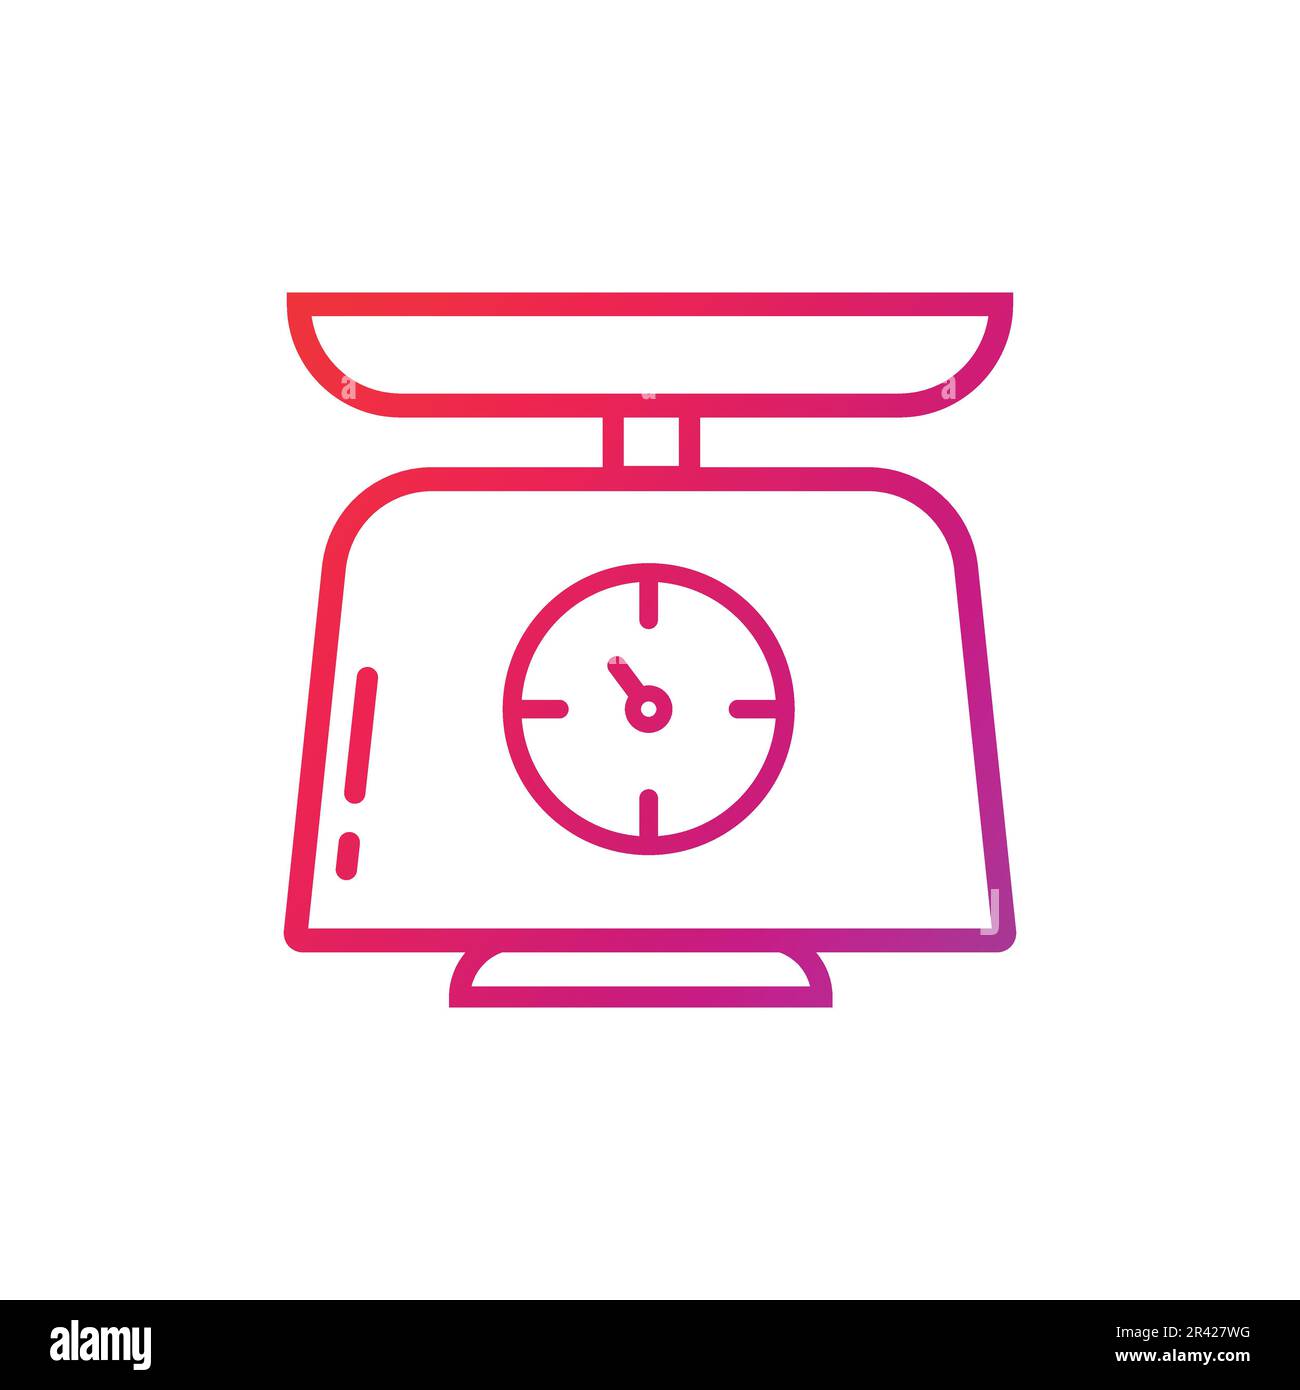 https://c8.alamy.com/comp/2R427WG/weighing-scale-gradient-icon-vector-illustration-2R427WG.jpg